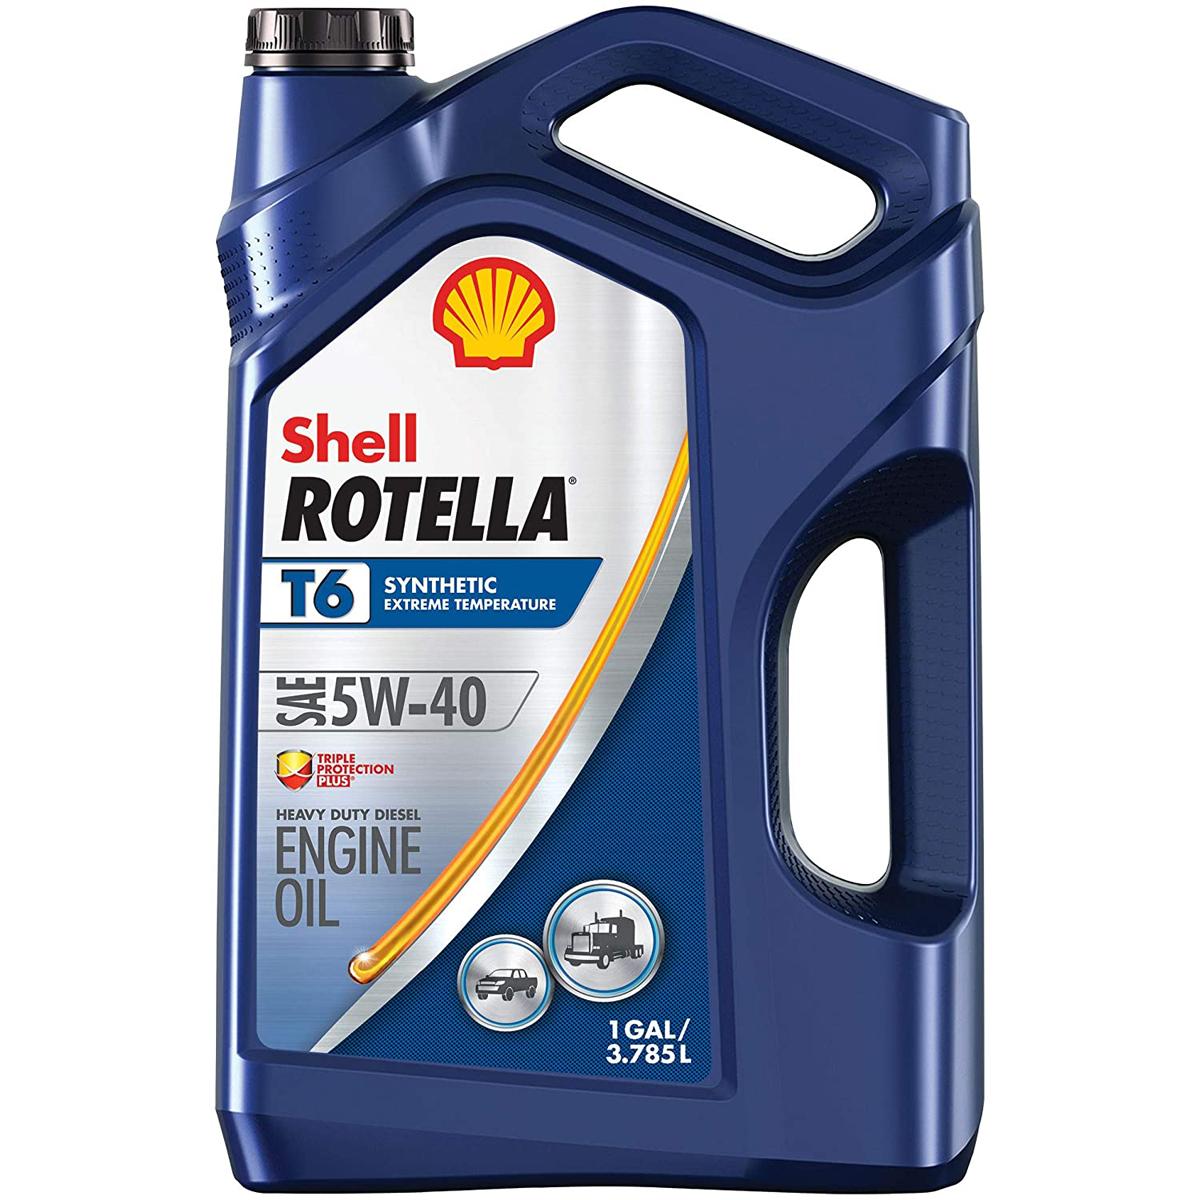 1 Gallon Shell Rotella T6 5W-40 Full Synthetic Engine Oil for $13.88 Shipped